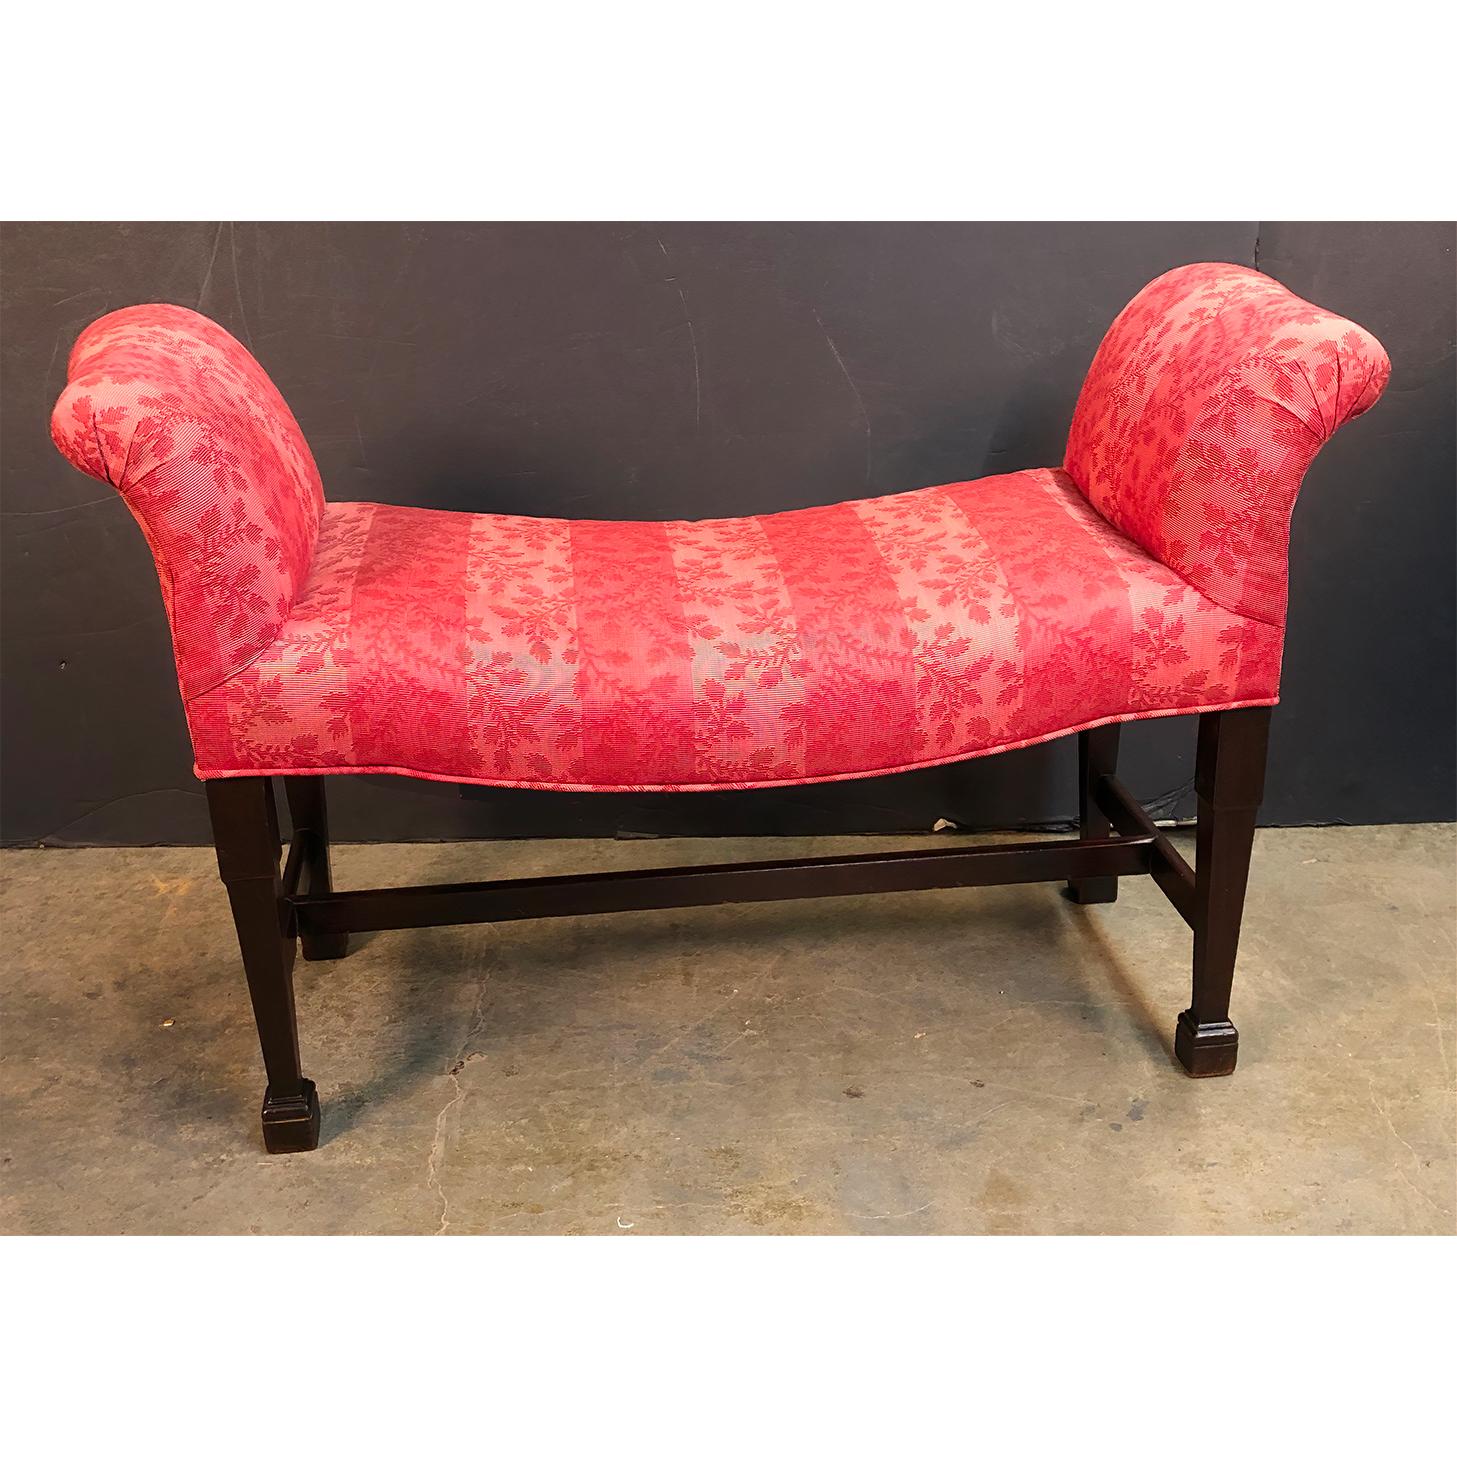 A fine and rare English George III mahogany (Chippendale) scroll arm window bench with an upholstered seat and arms, saddle seat with an H stretcher base and with bold Marlboro feet.